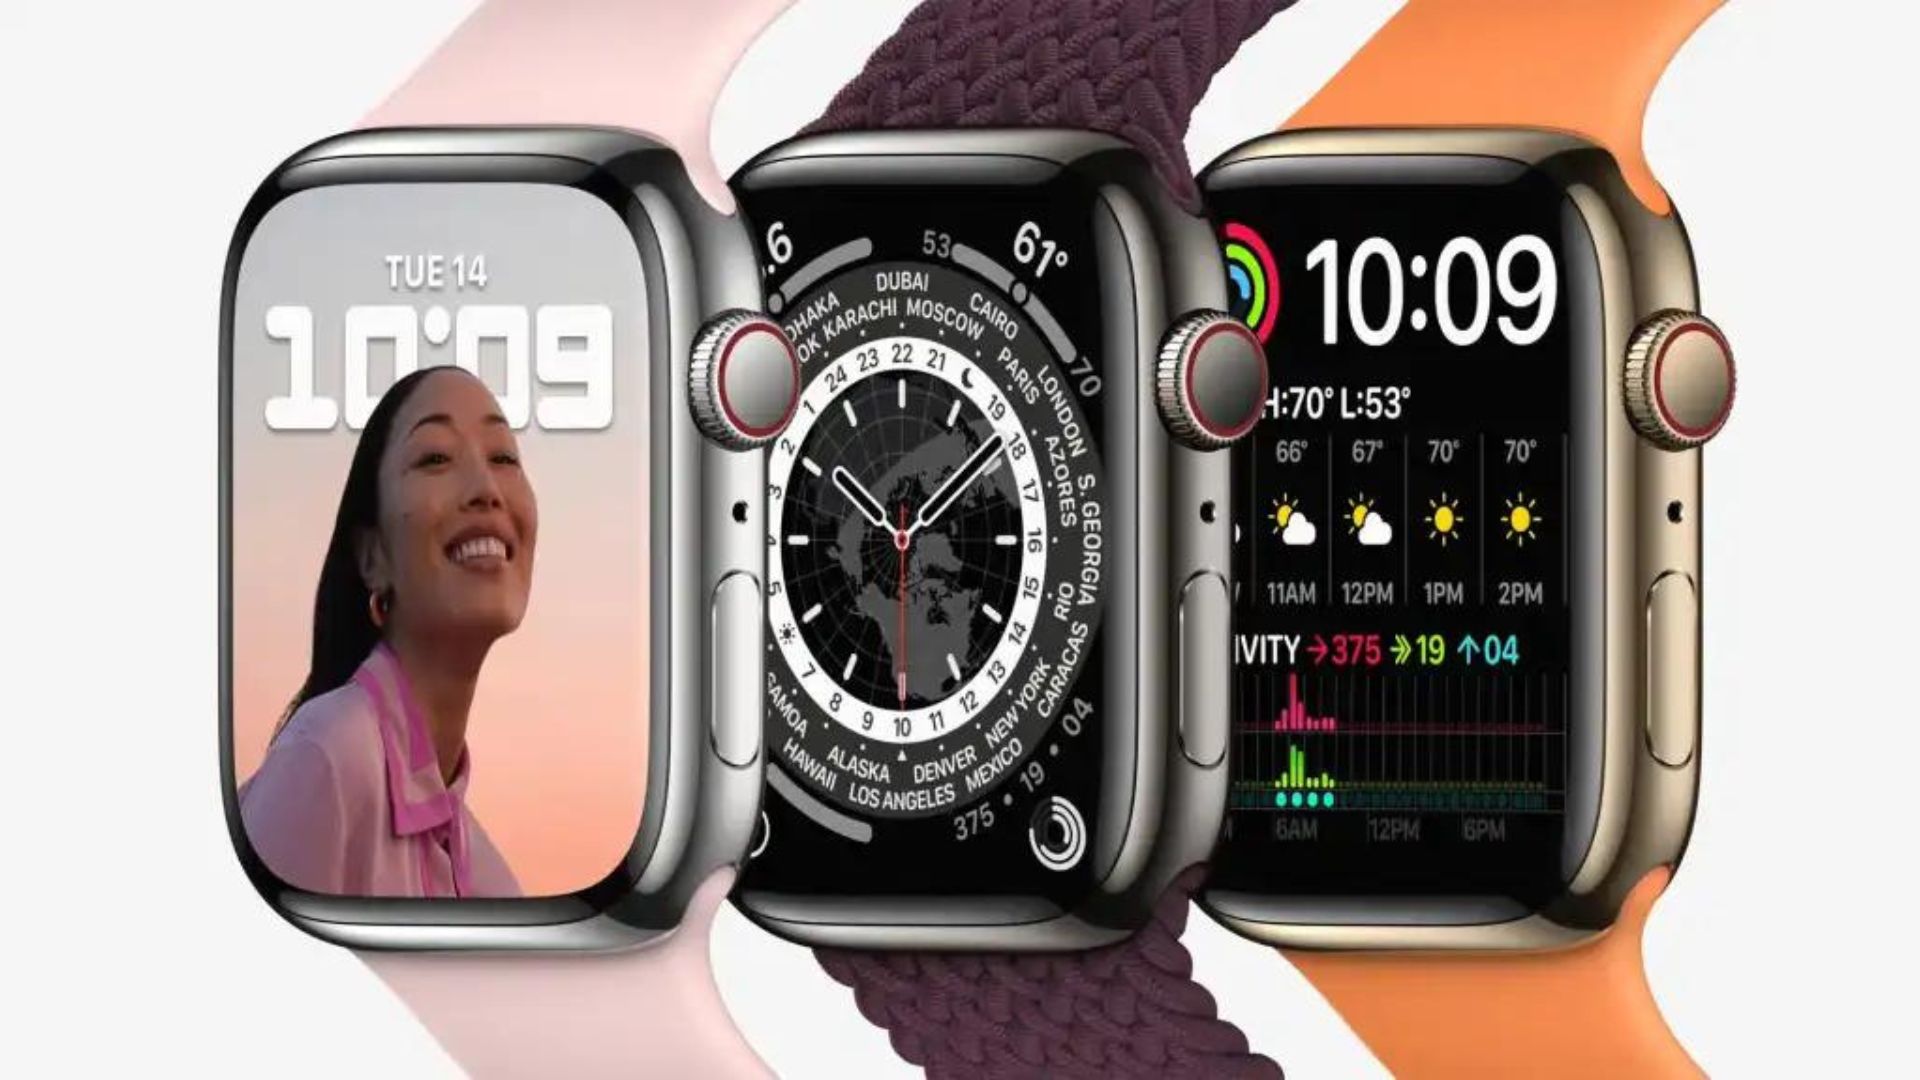 The Best Apple Watch Deals: This Is The Lowest We’ve Seen For The Apple